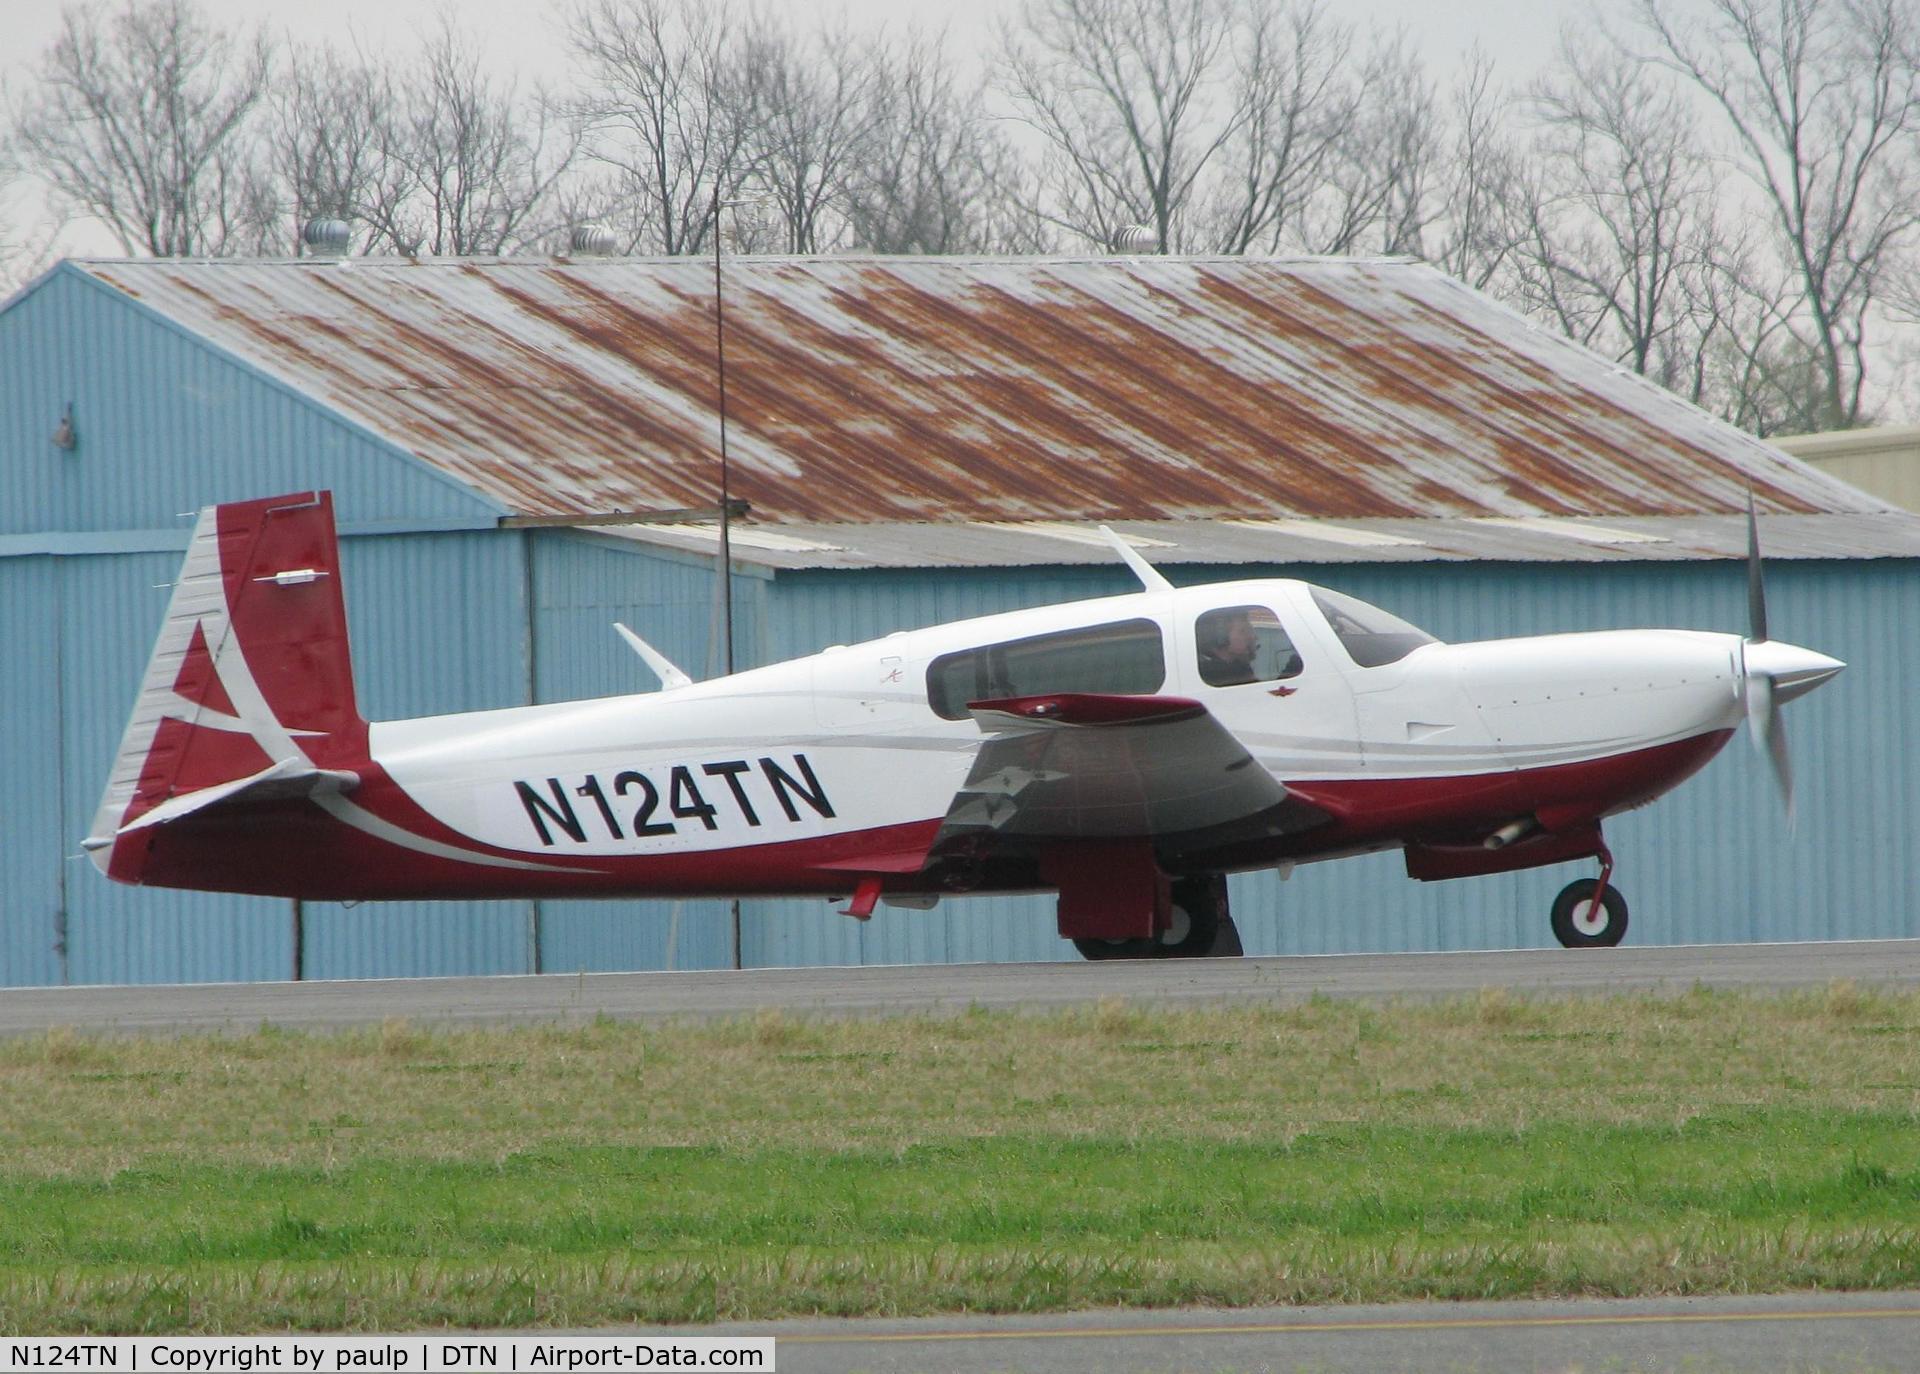 N124TN, Mooney M20TN Acclaim C/N 31-0124, Taking off from the Shreveport Downtown airport.